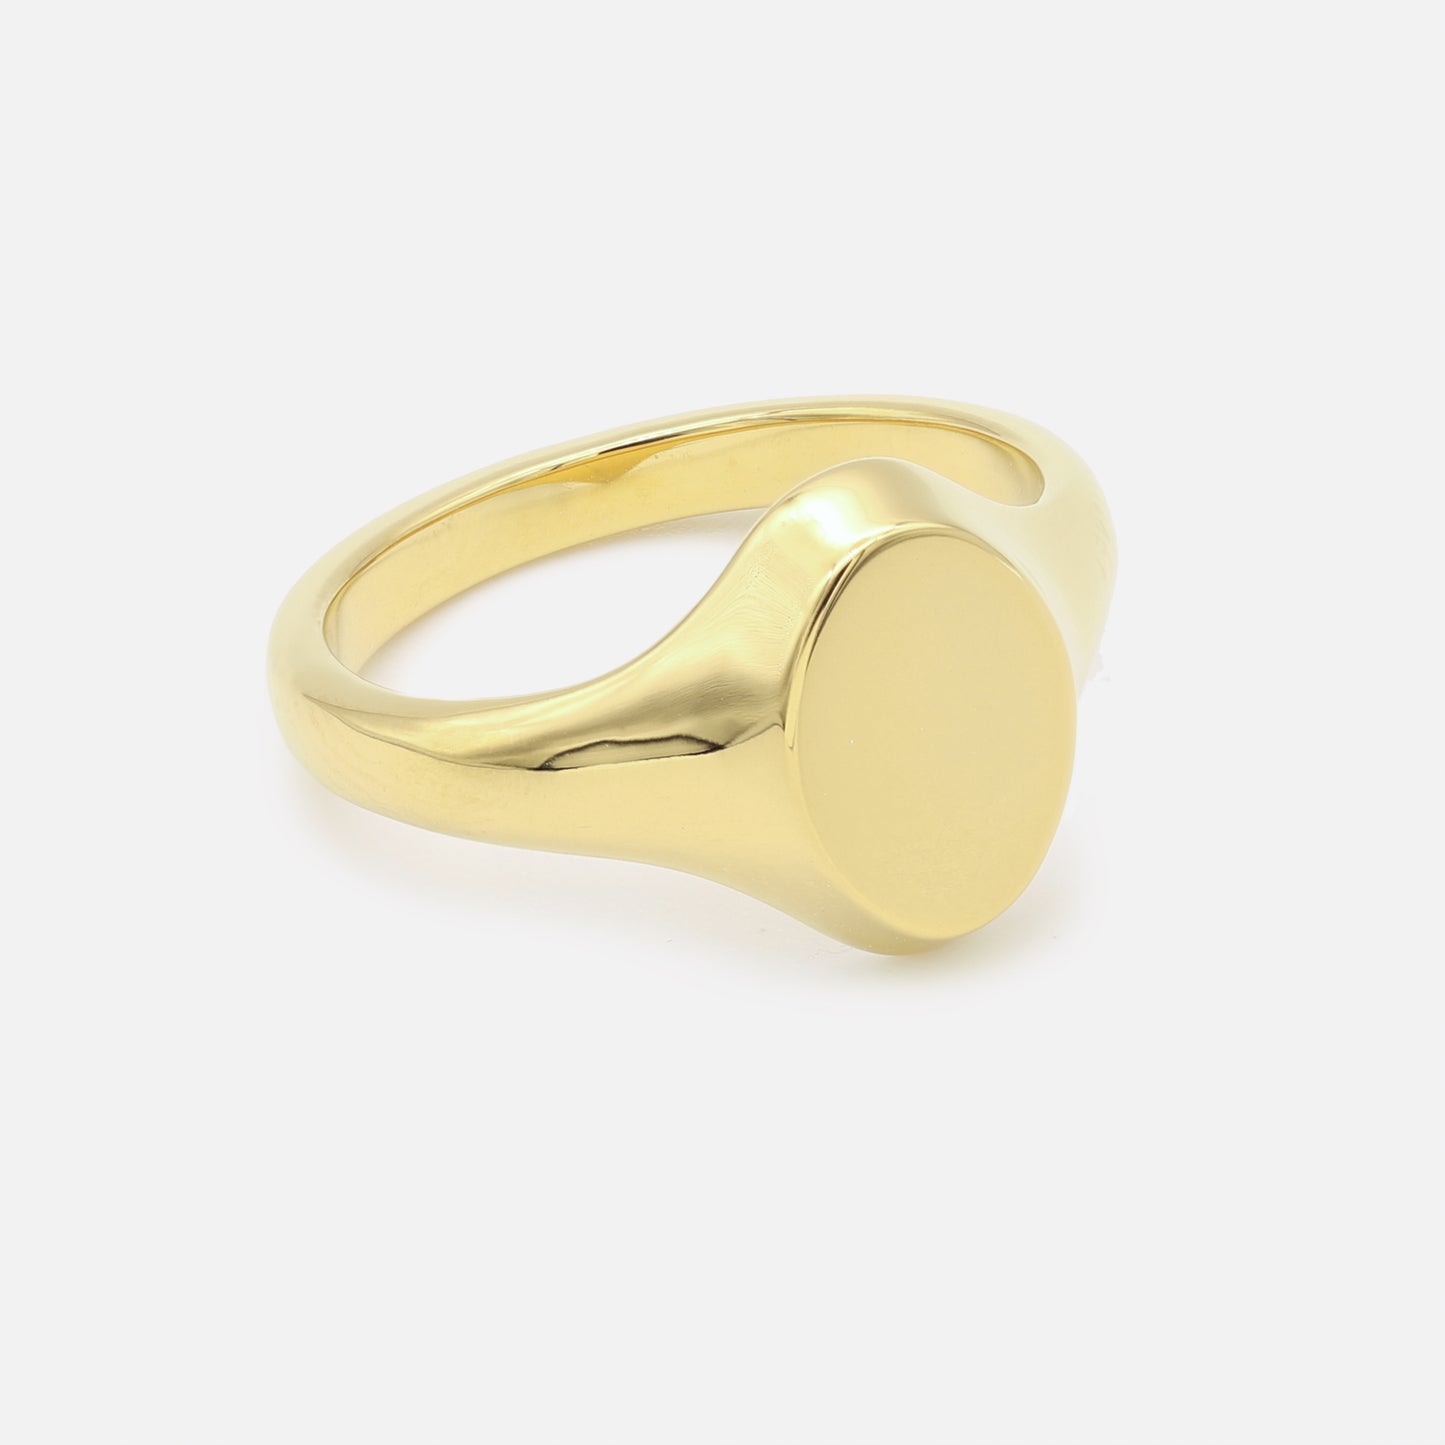 Mirror Oval Signet Ring in Gold Plated Brass